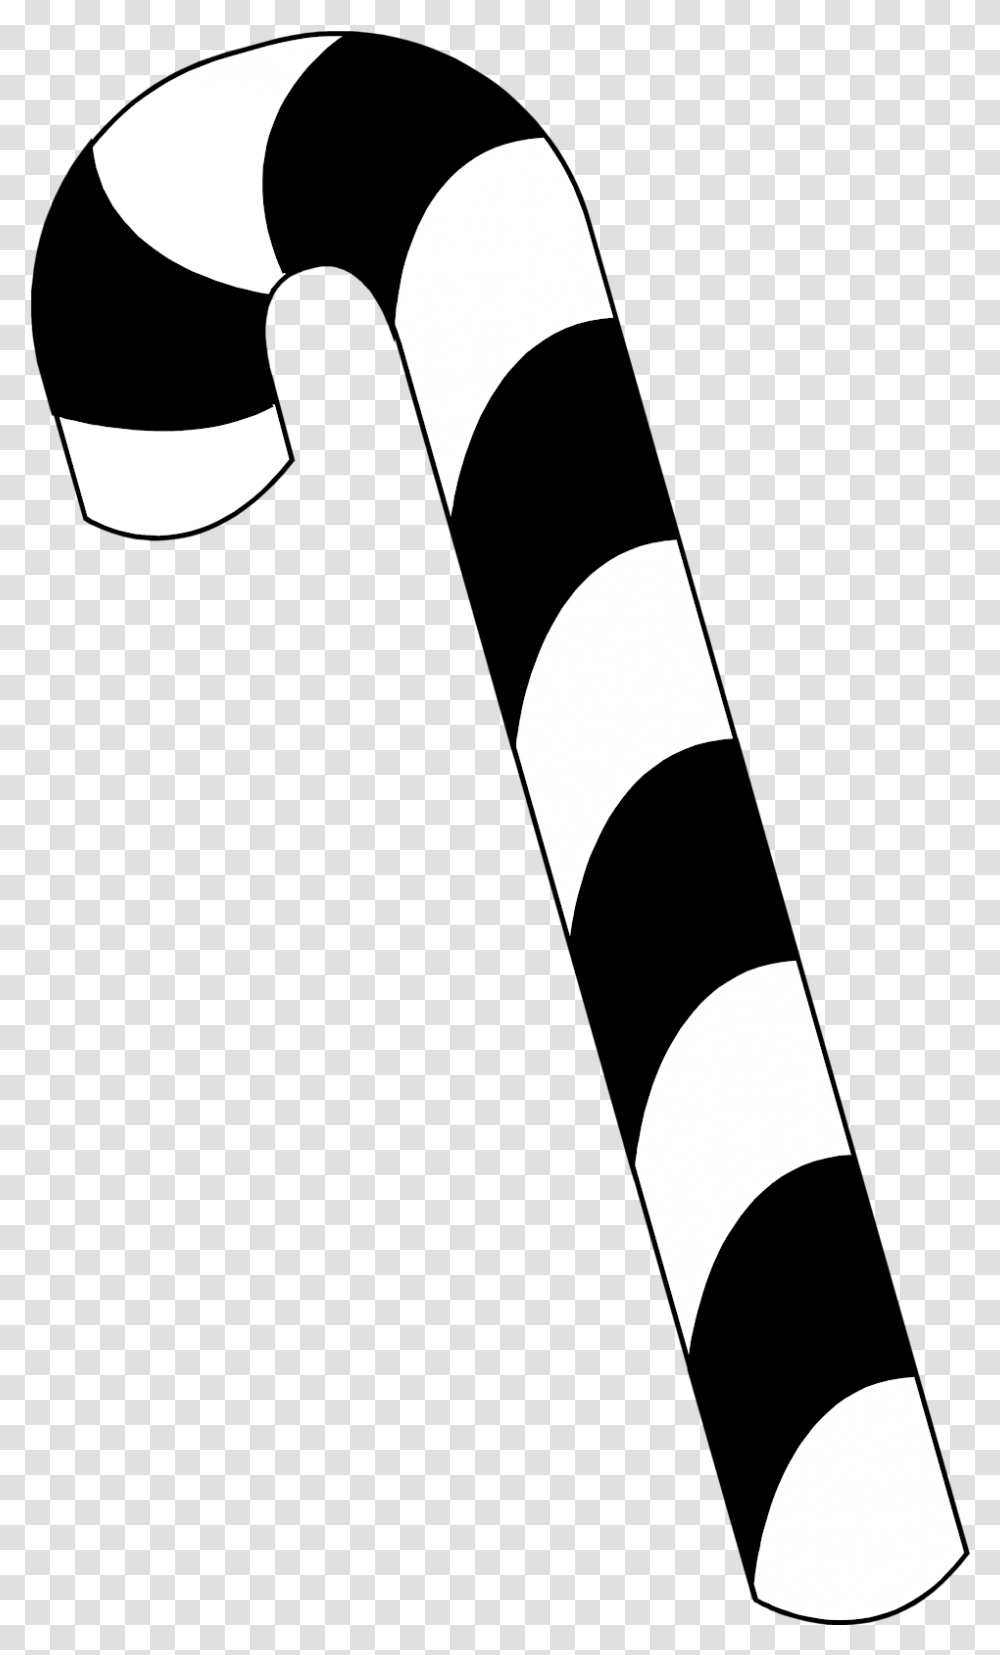 Download Candy Cane Christmas Images Graphics Image Black And White Cane, Cross, Symbol, Batman Logo, Clothing Transparent Png